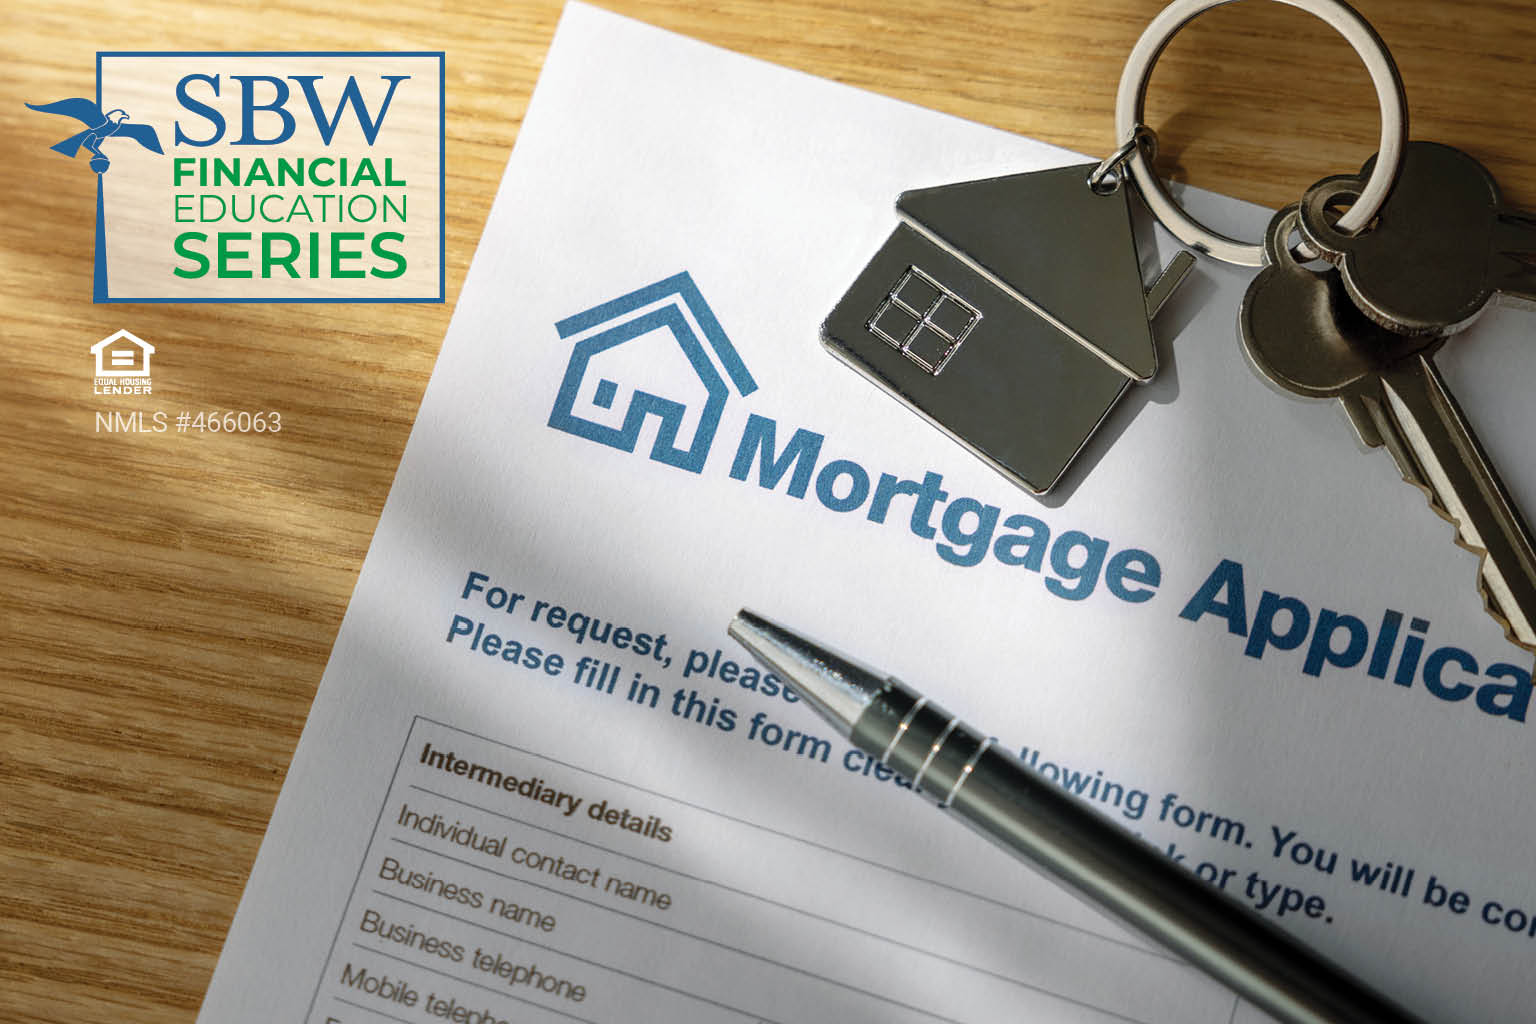 FREE Seminar For The Mortgage Financing Process